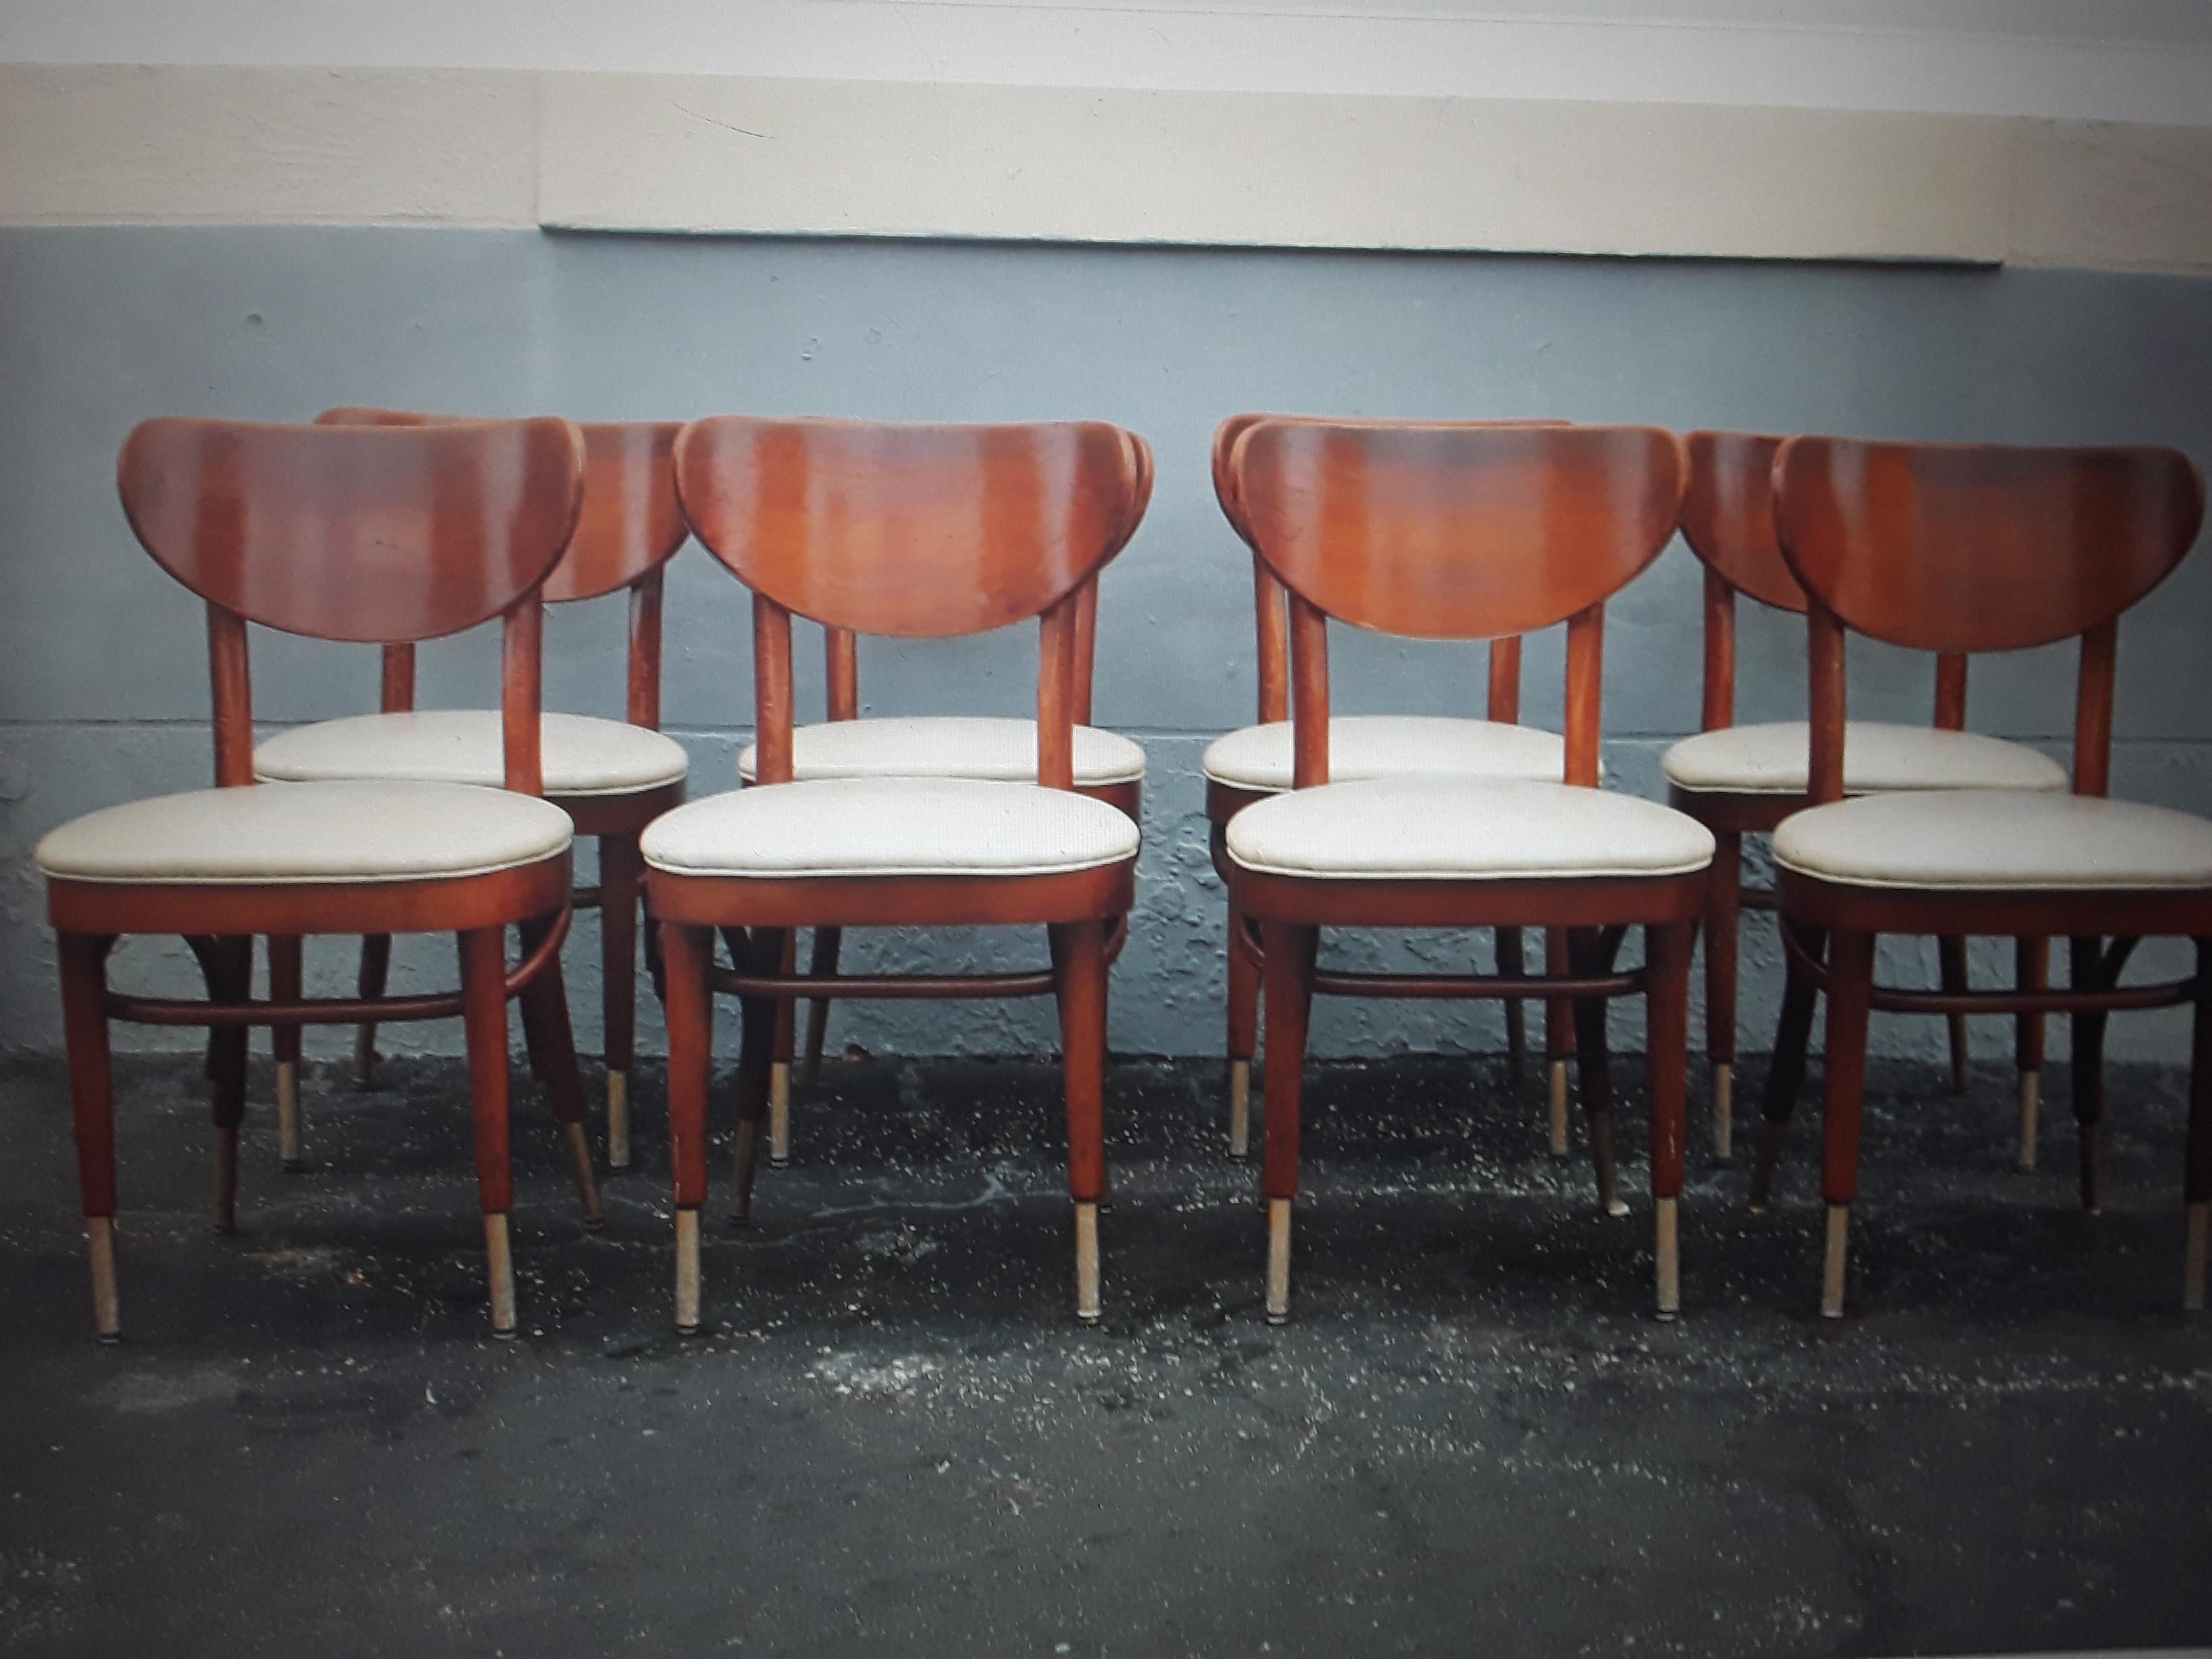 Set of 6 Mid Century Modern Futuristic style Dining Chairs. Bent wood and sabot caps on legs. Beautiful set!